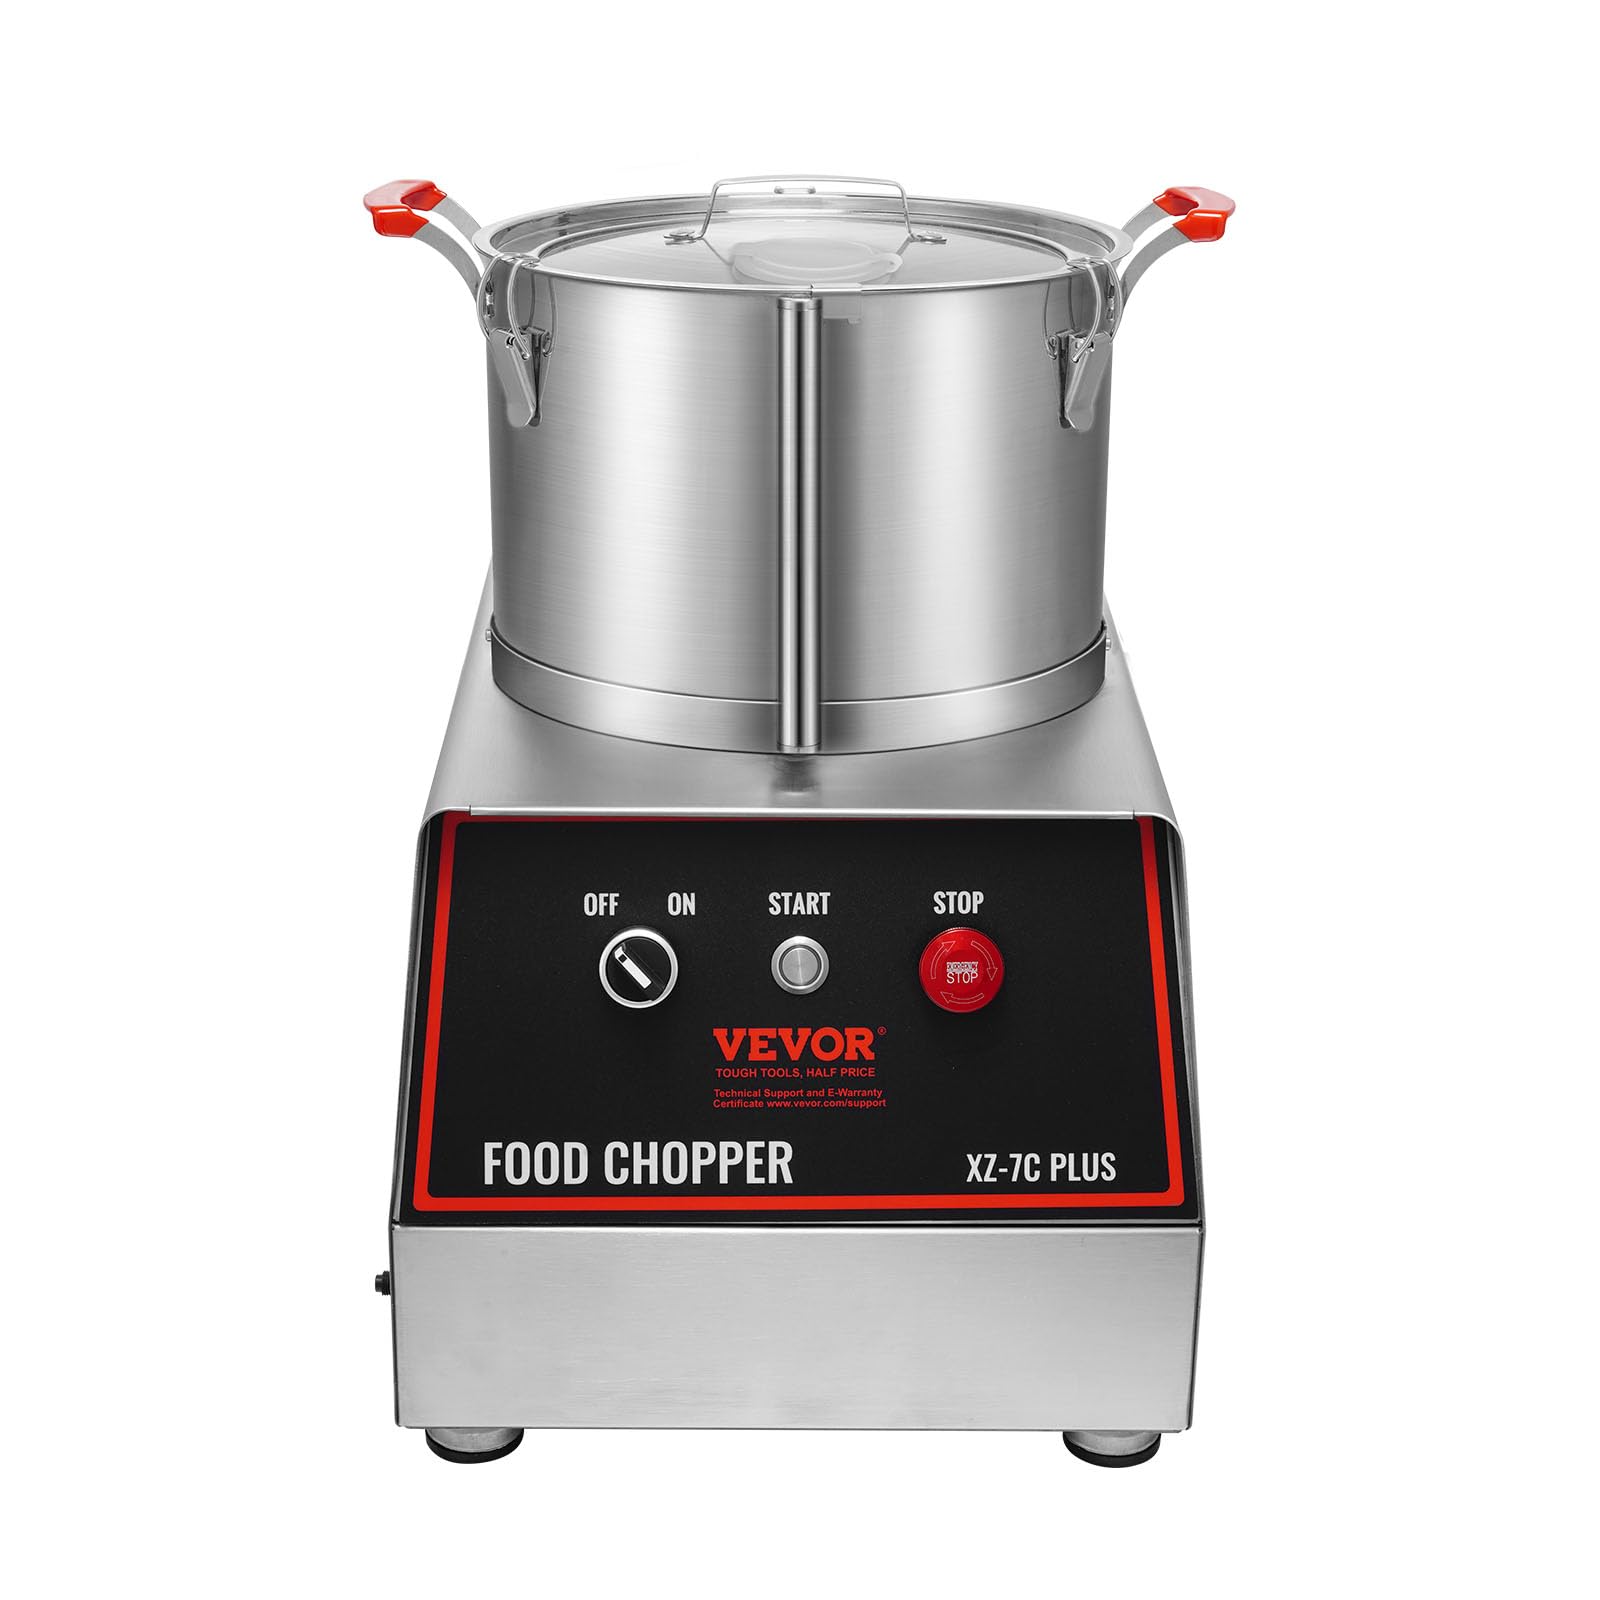 VEVOR Food Processor & Vegetable Chopper, 7 Quart Bowl, 750W Food-Grade Stainless Steel Food Processor Chopper with 2 Extra S-Curve Blades, Multifunctional for Chopping Vegetables, Meat, Grains, Nuts